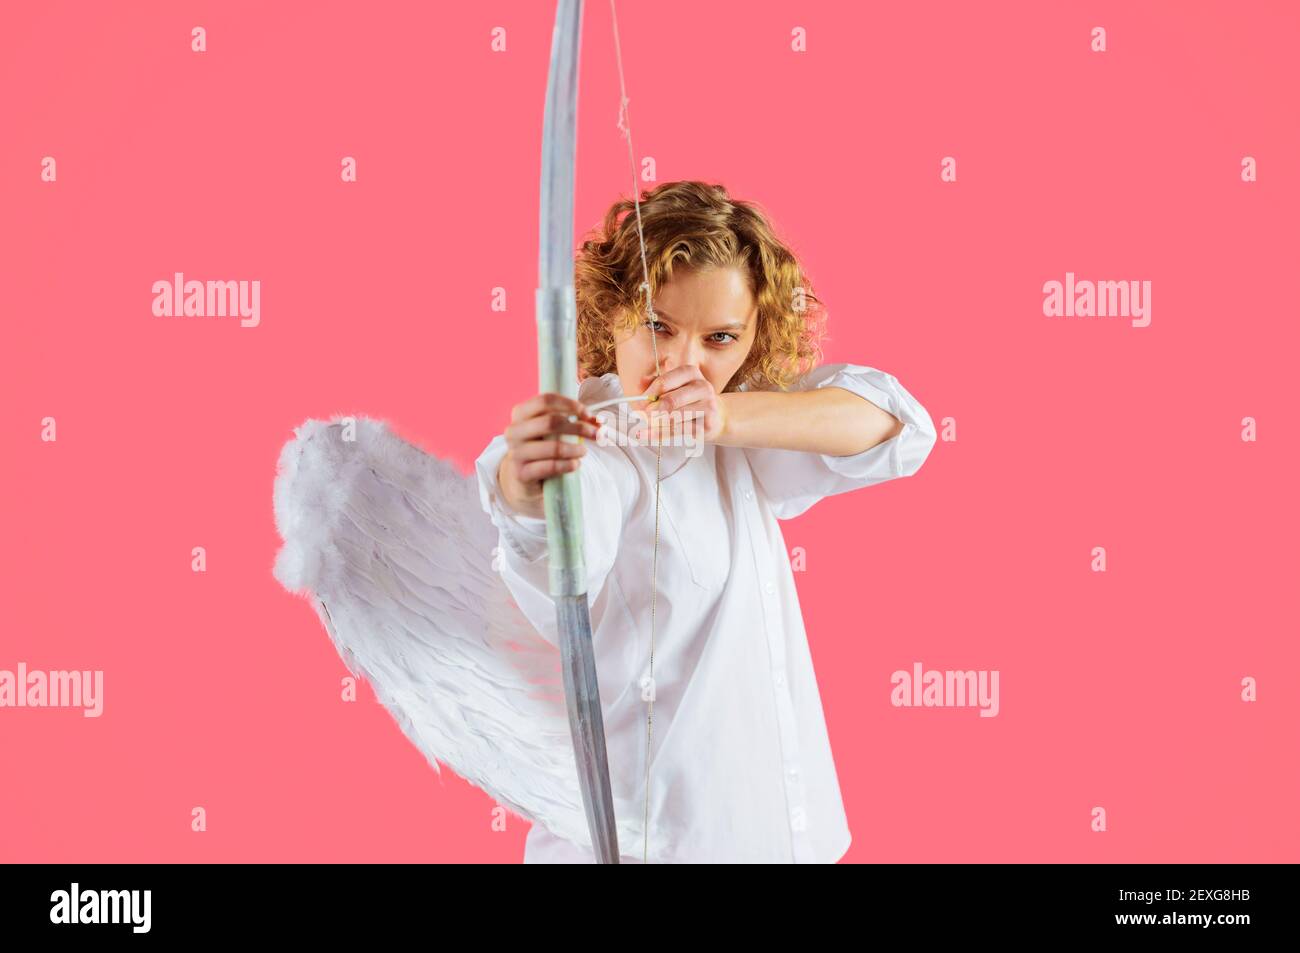 Valentines Day. Angel girl with arrows and bow. Cupid woman with white wings. Stock Photo